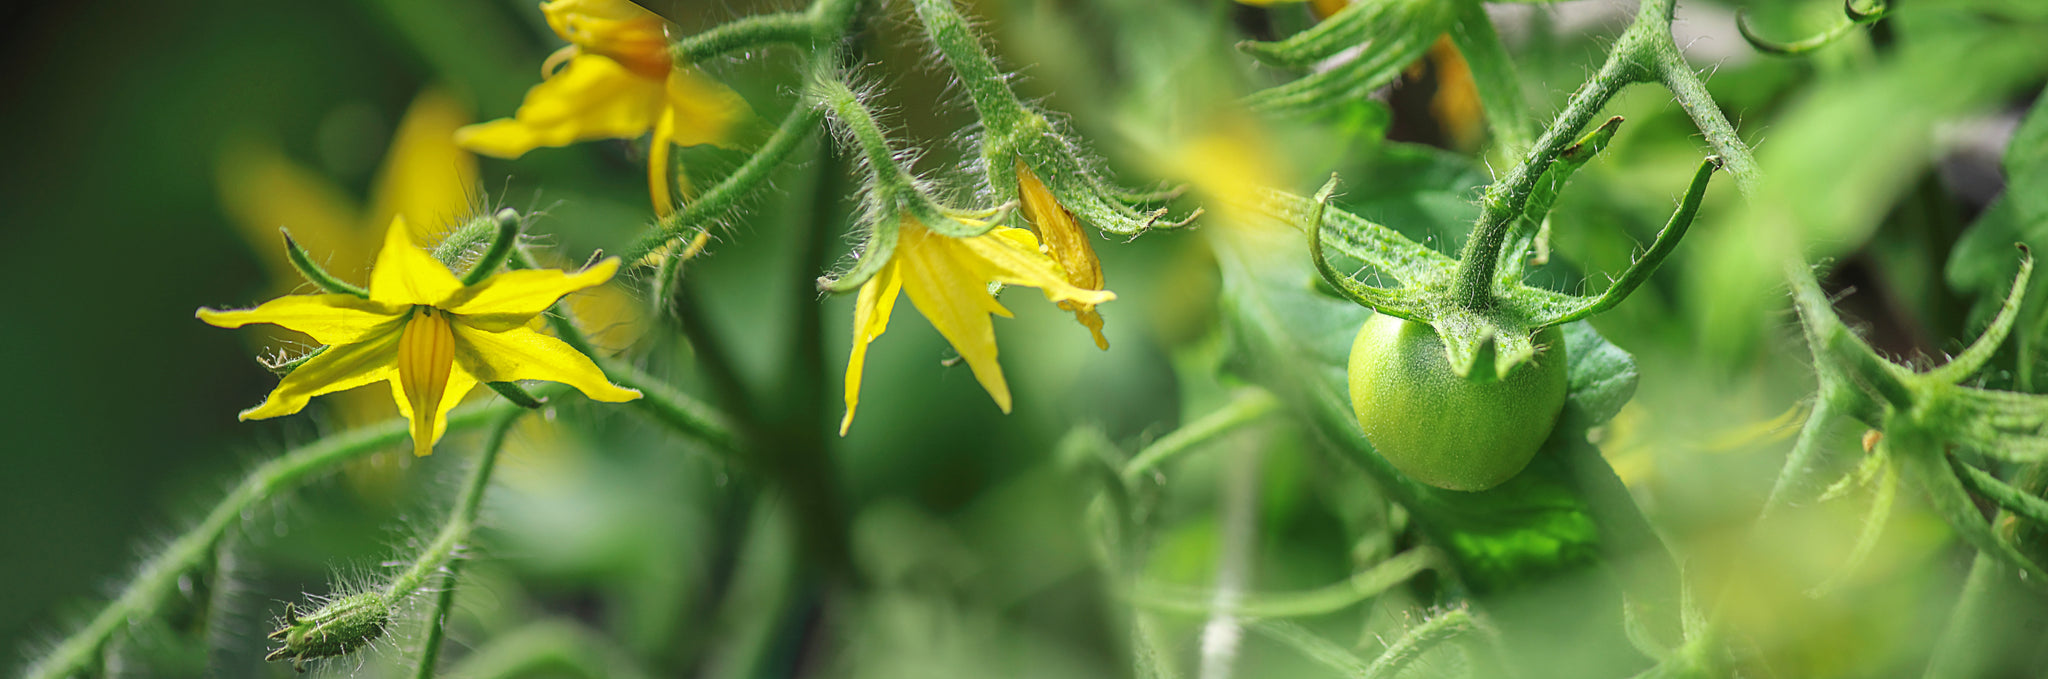 Growing tomatoes at home, close up of tomato flower